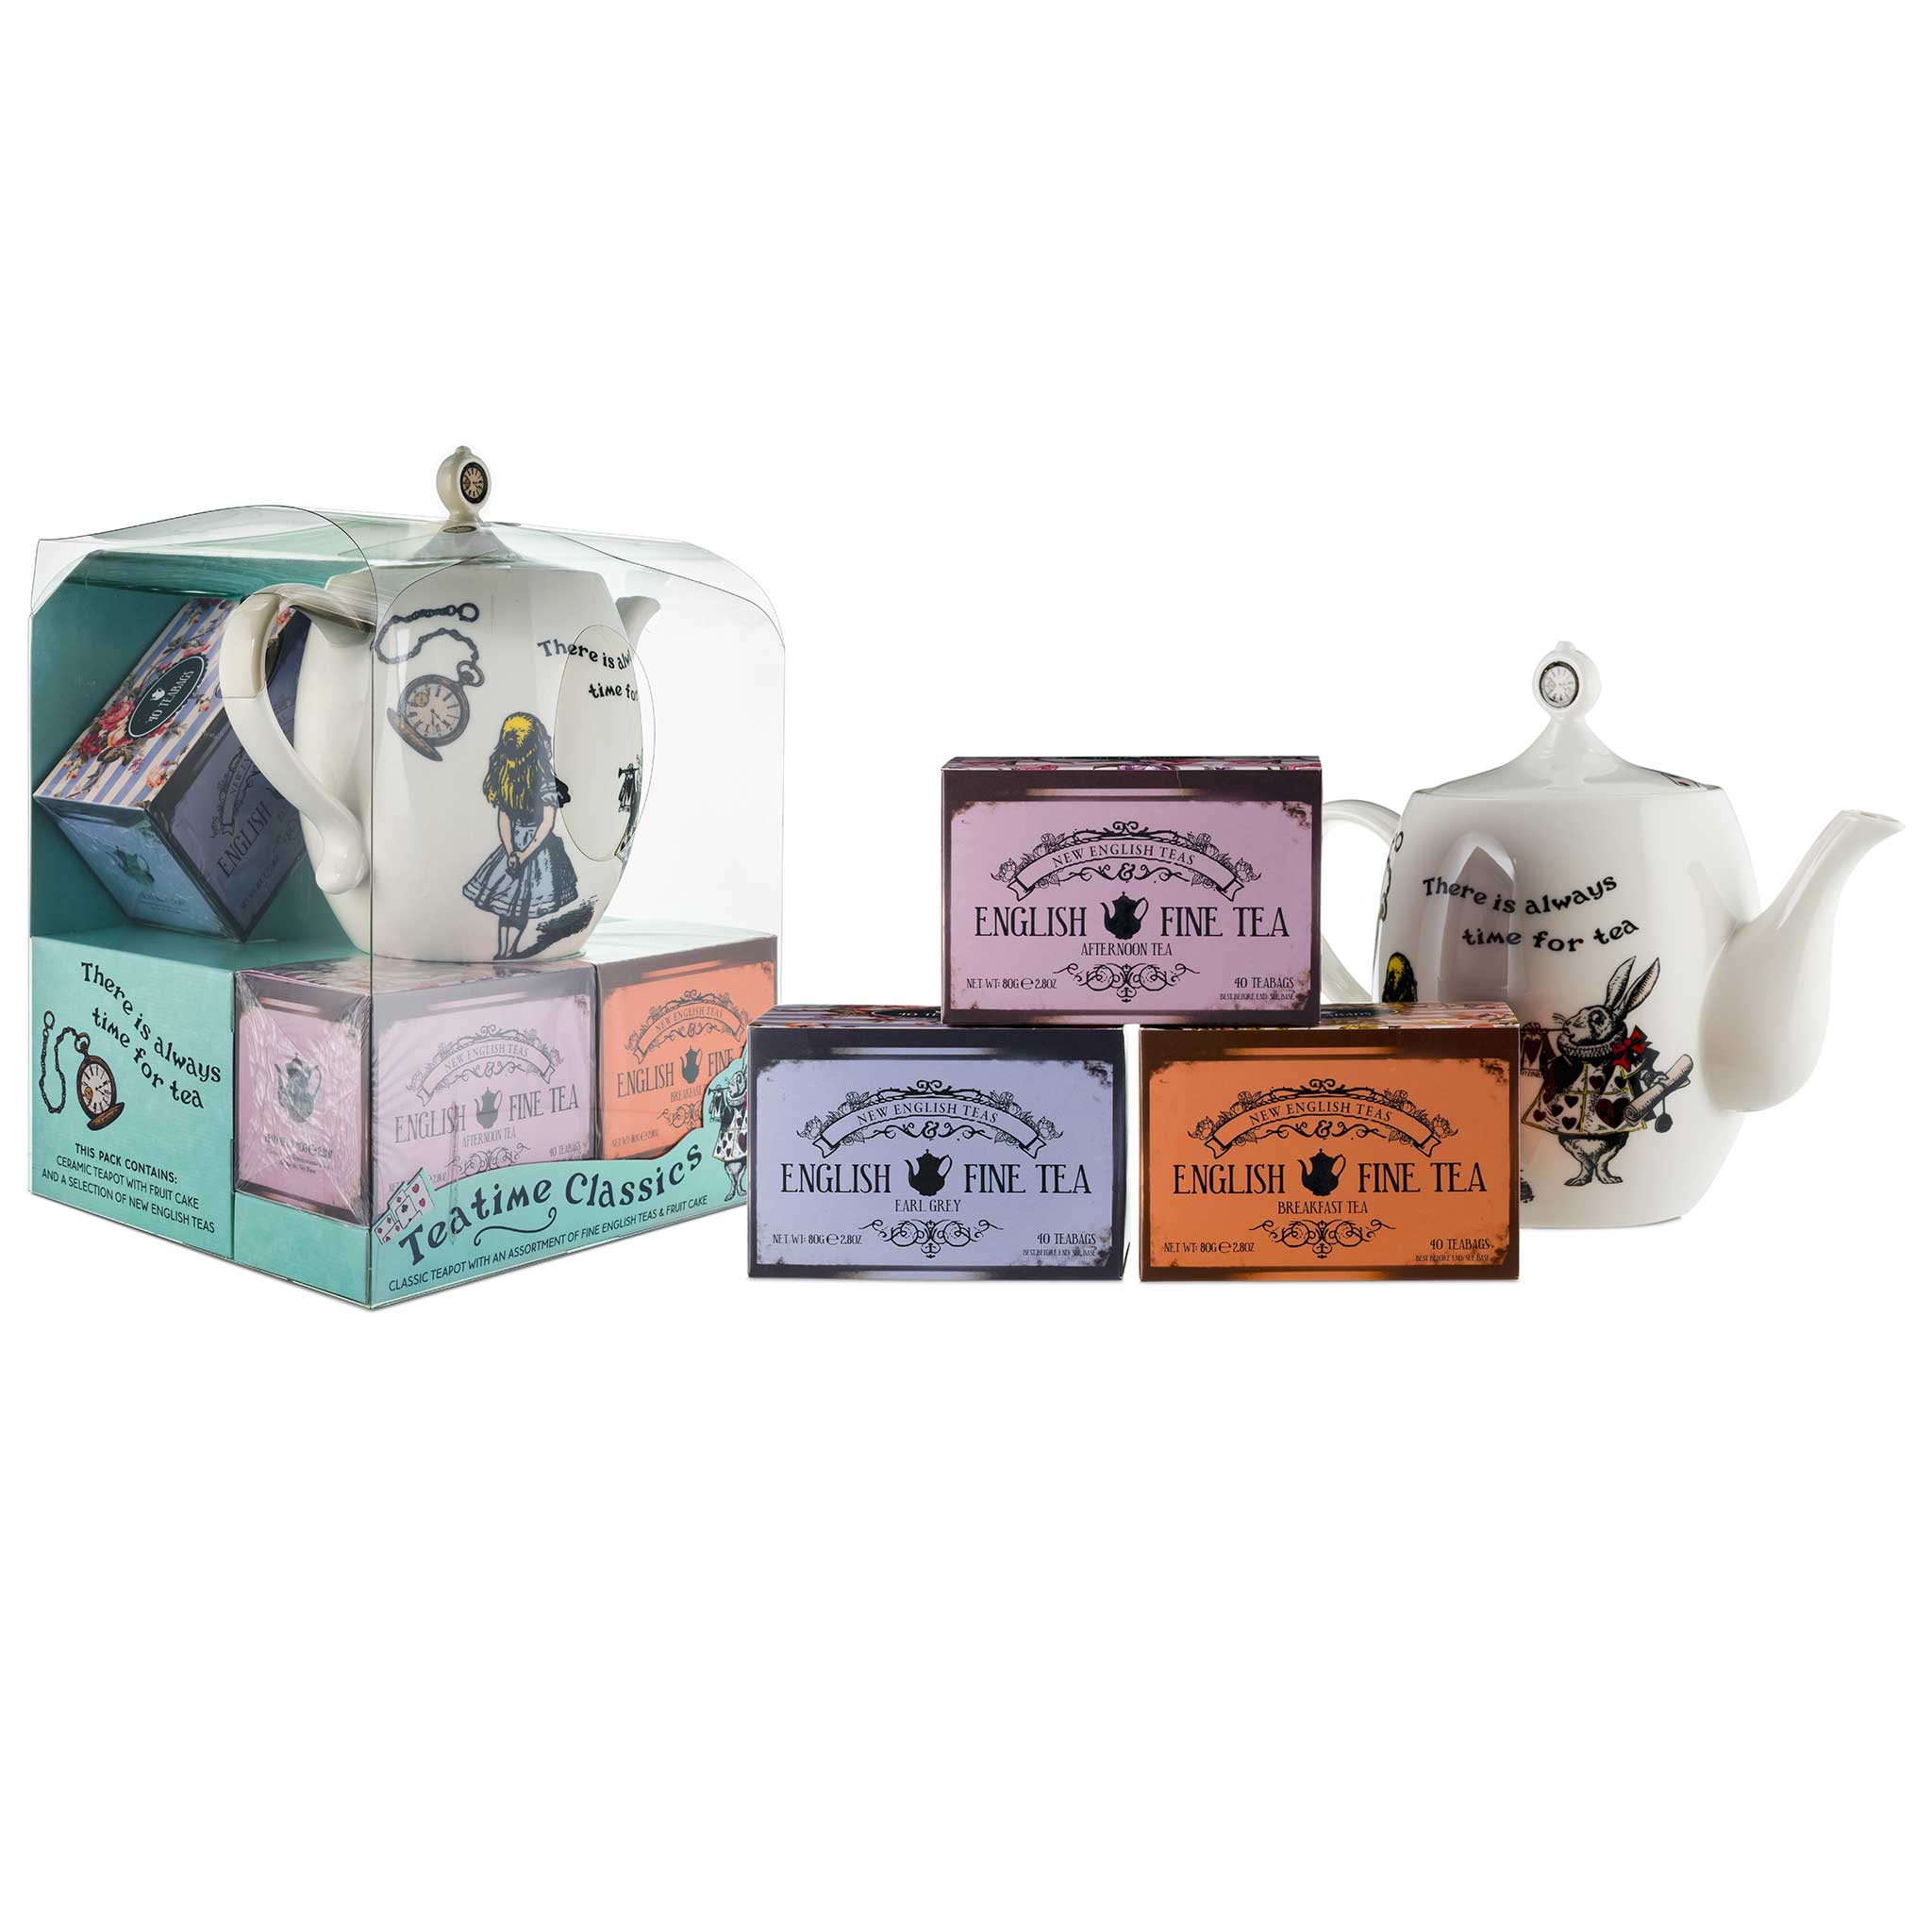 Alice in Wonderland Teapot and Loose Tea Selection from China Blue